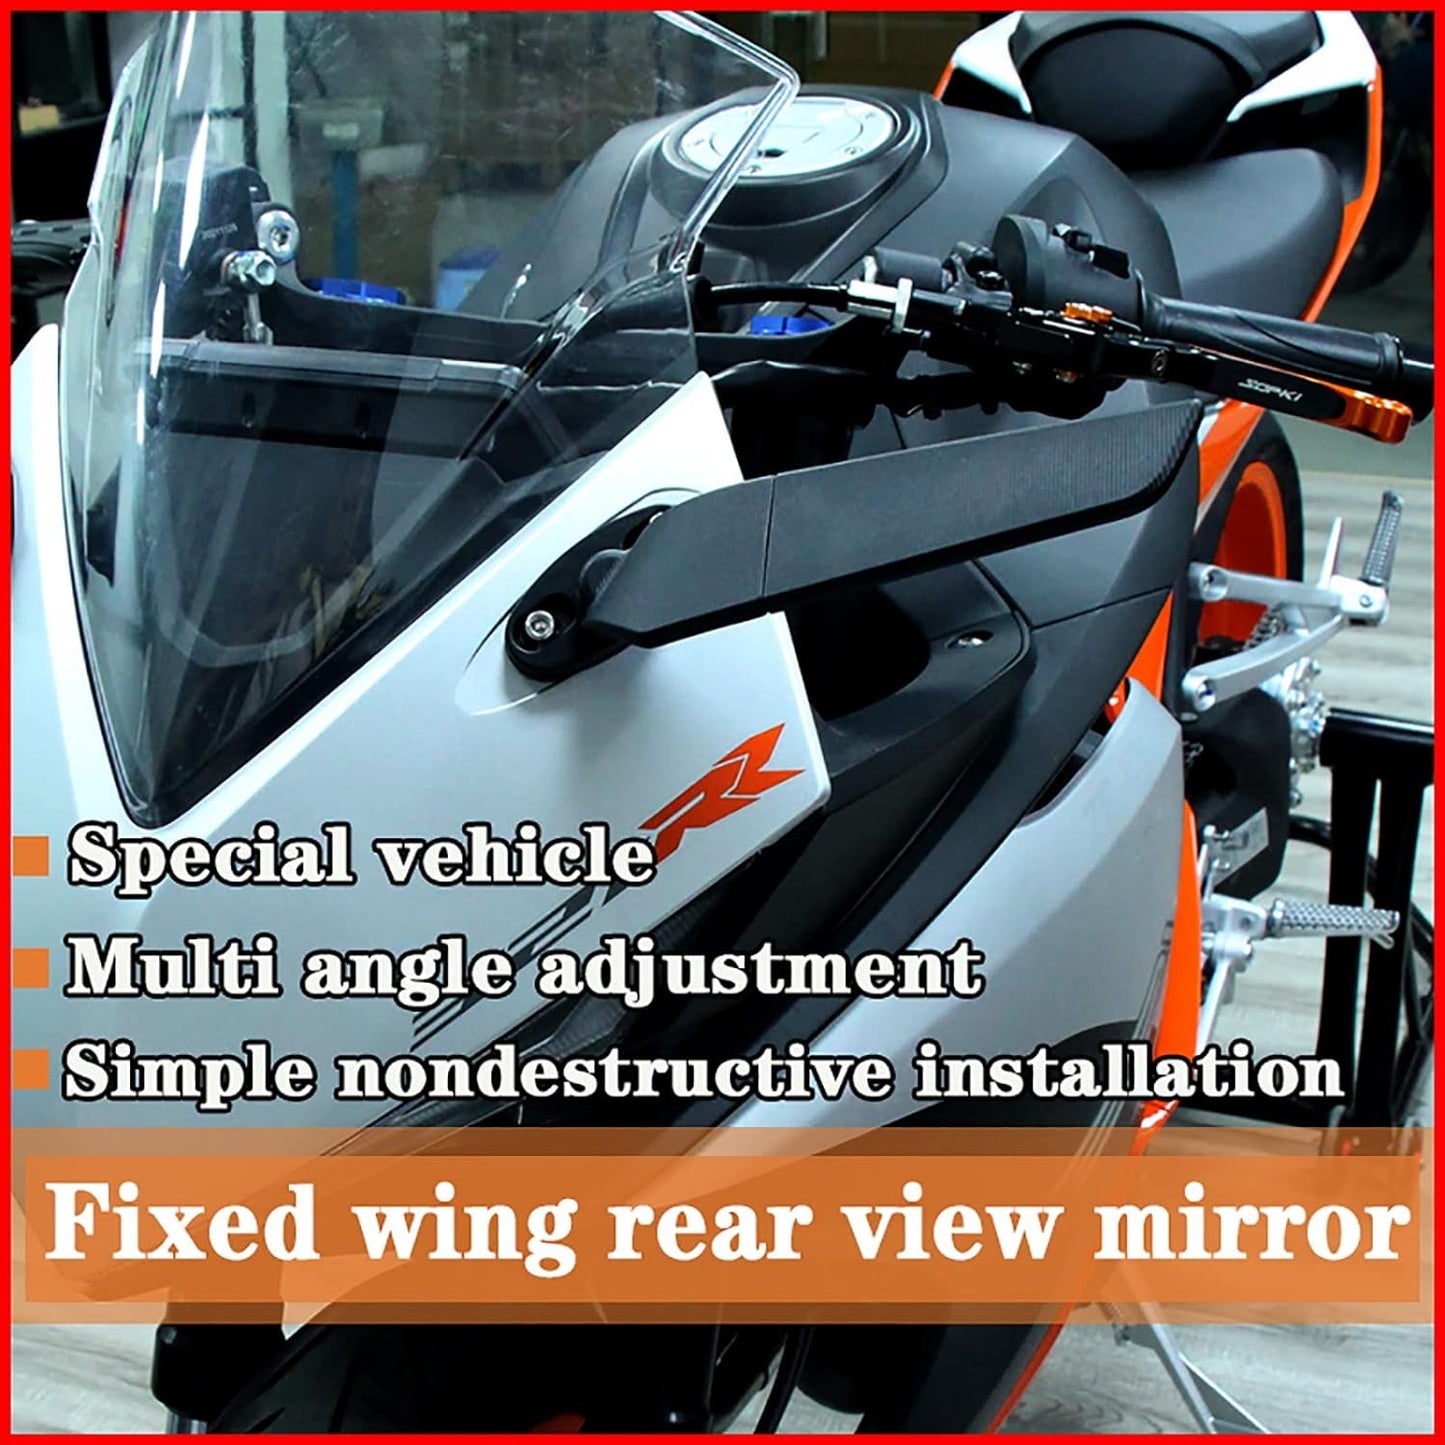 Modified Motorcycle Wing Rearview Mirrors Adjustable Rotating Side Mirrors Wind Swivel Wing Mirrors Multi Angle With Lights ( Color : Black ) CO : 454926